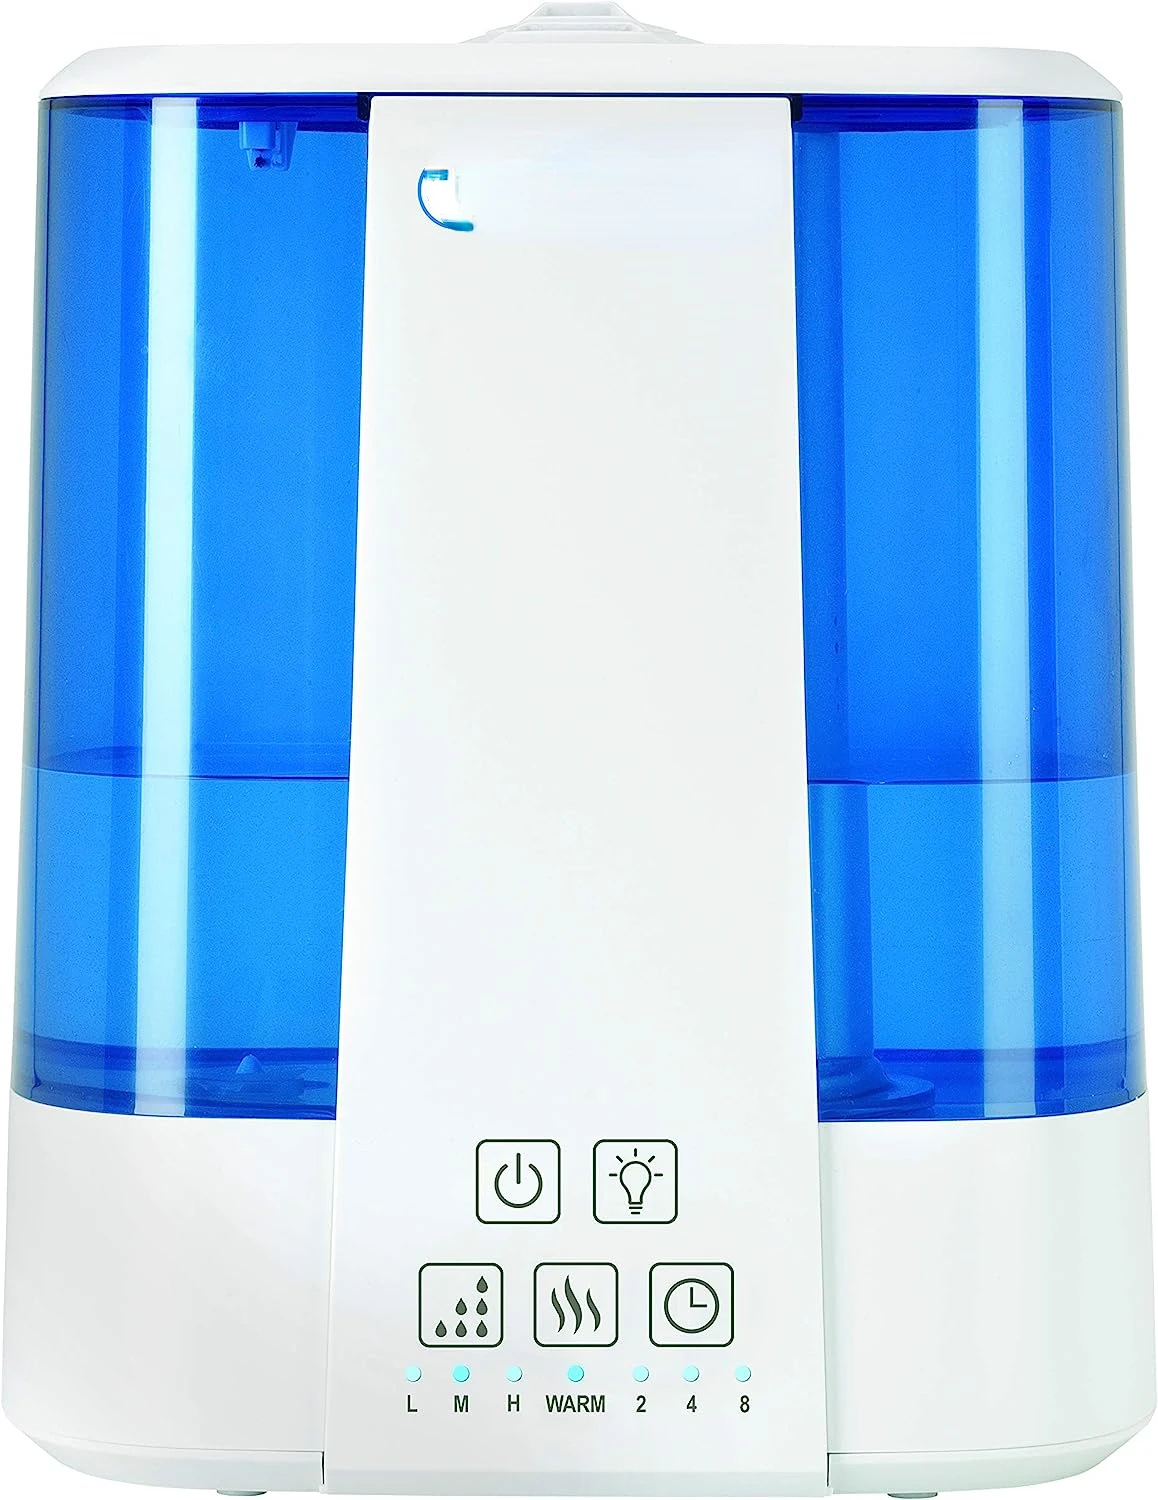 

Ultrasonic Warm & Cool Mist Humidifier, 100 Hrs. Run Time, 2 Gal. Tank, 560 Sq. Ft. Coverage, Quiet, Filter Free, Essential